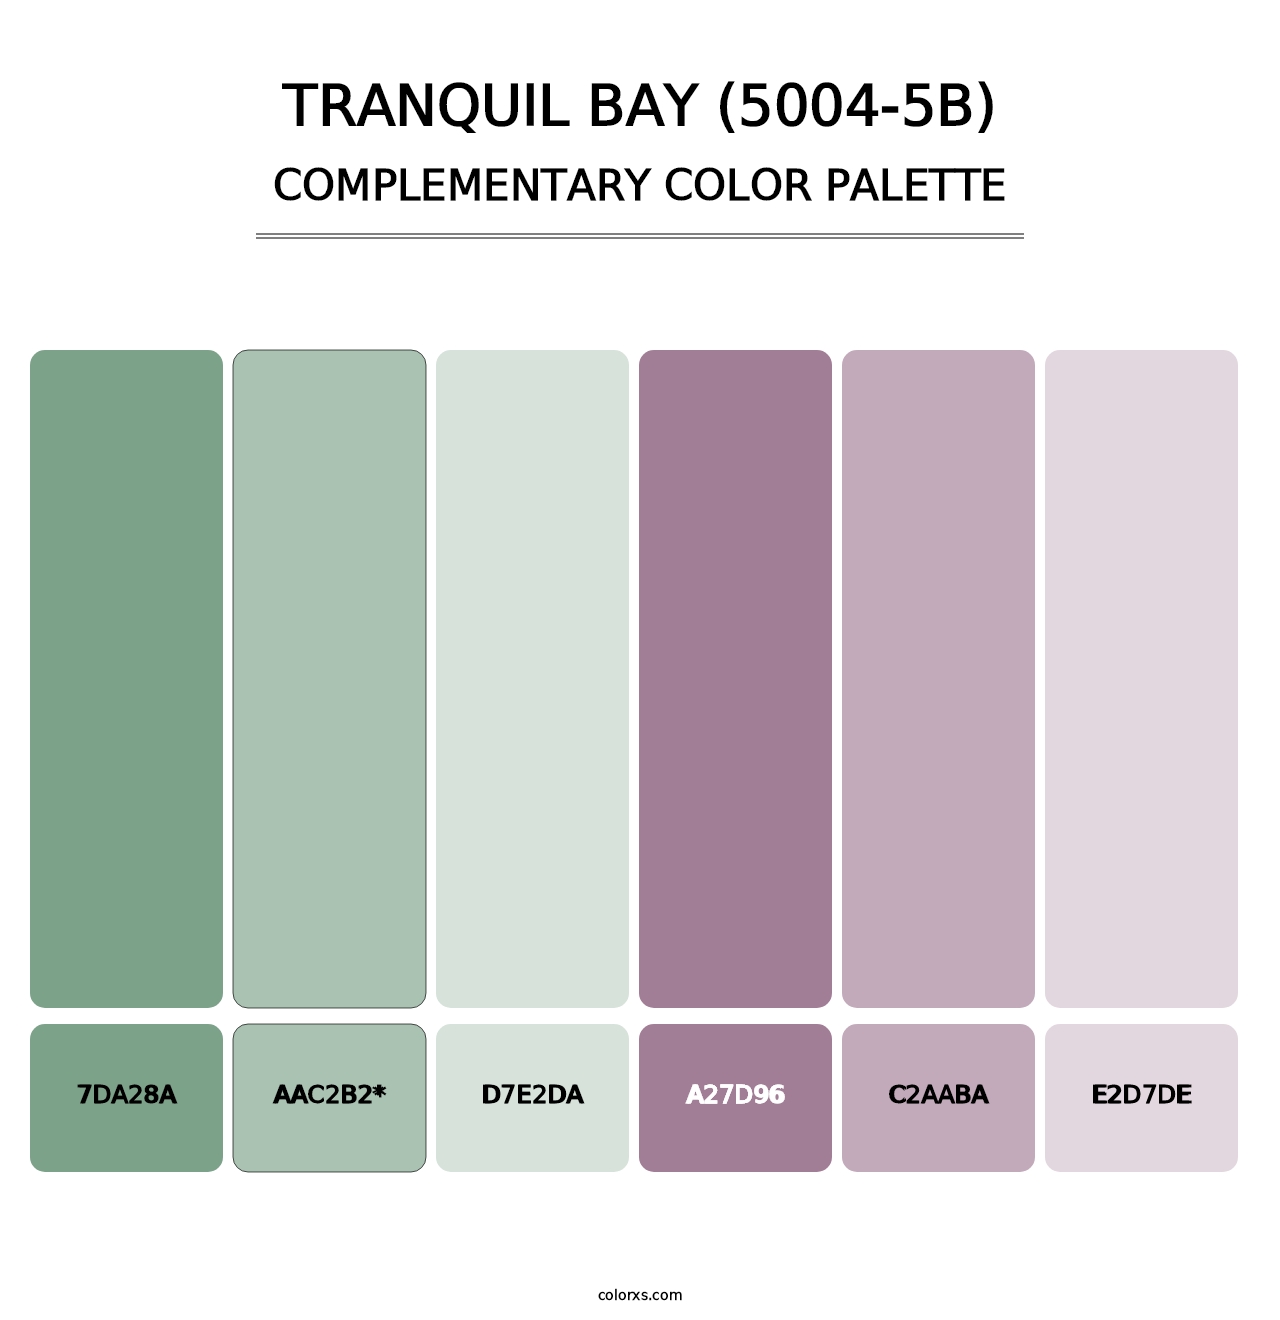 Tranquil Bay (5004-5B) - Complementary Color Palette